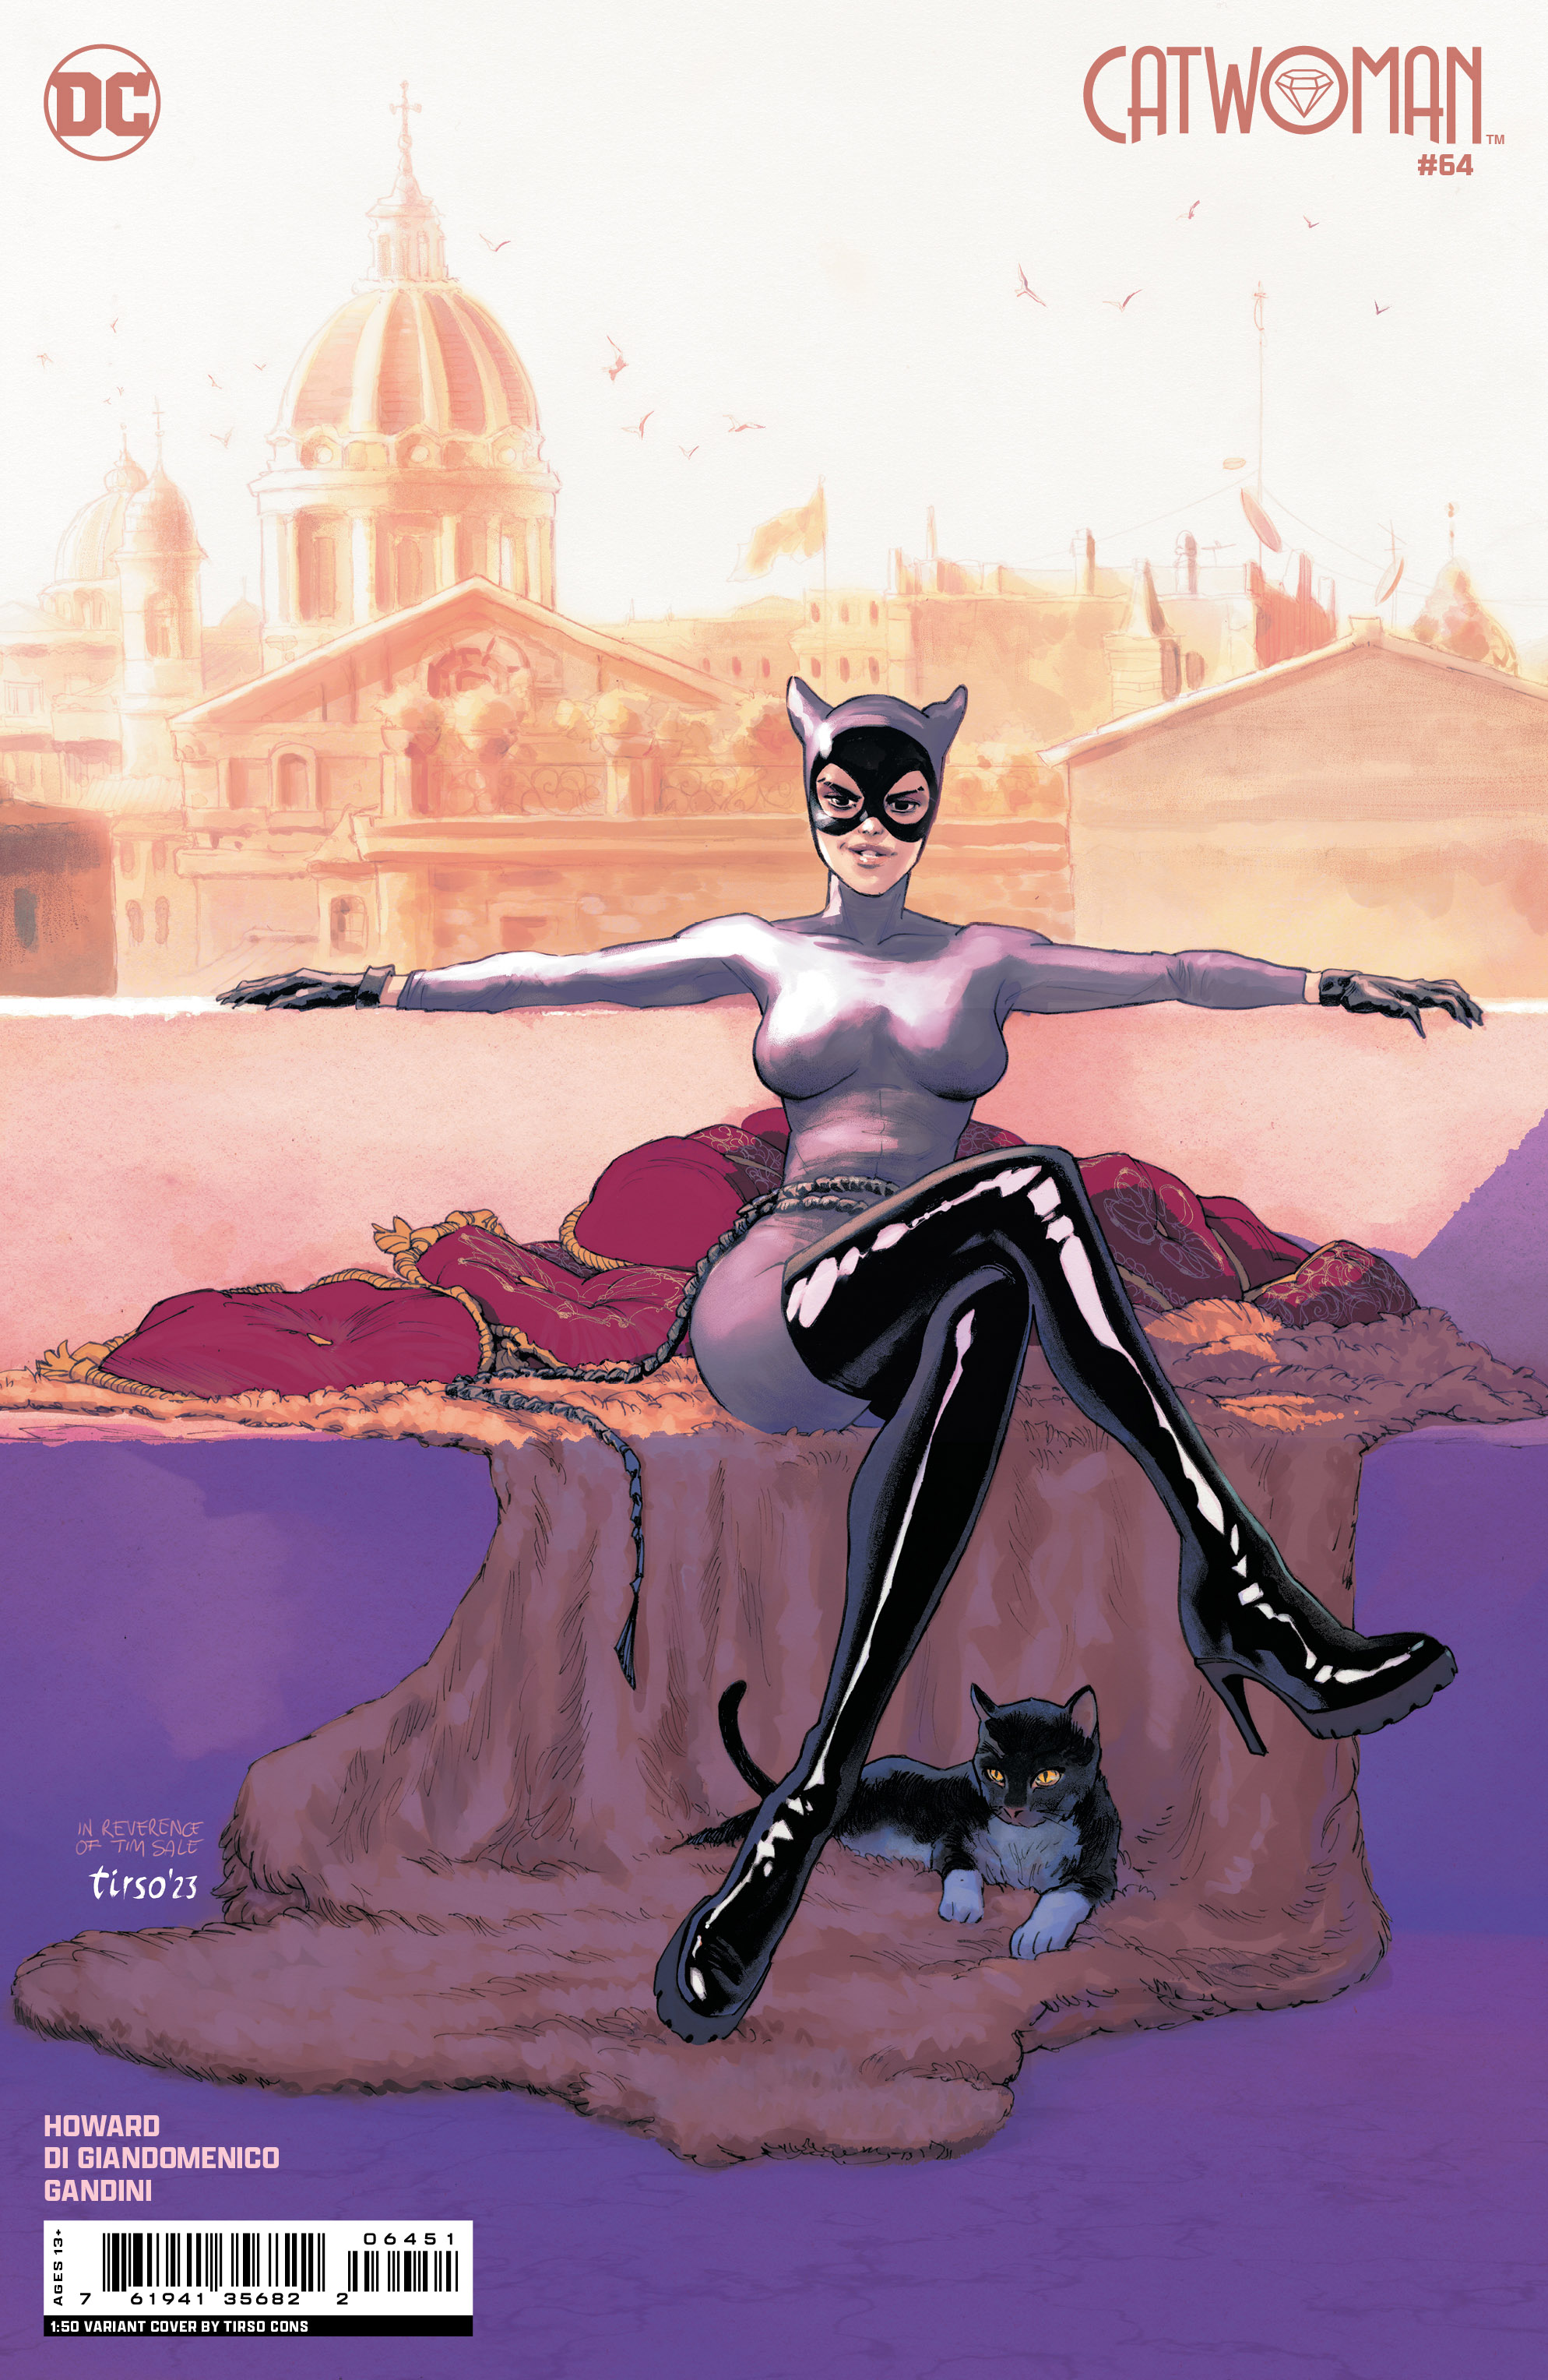 Catwoman #64 Cover F 1 for 50 Incentive Tirso Cons Card Stock Variant